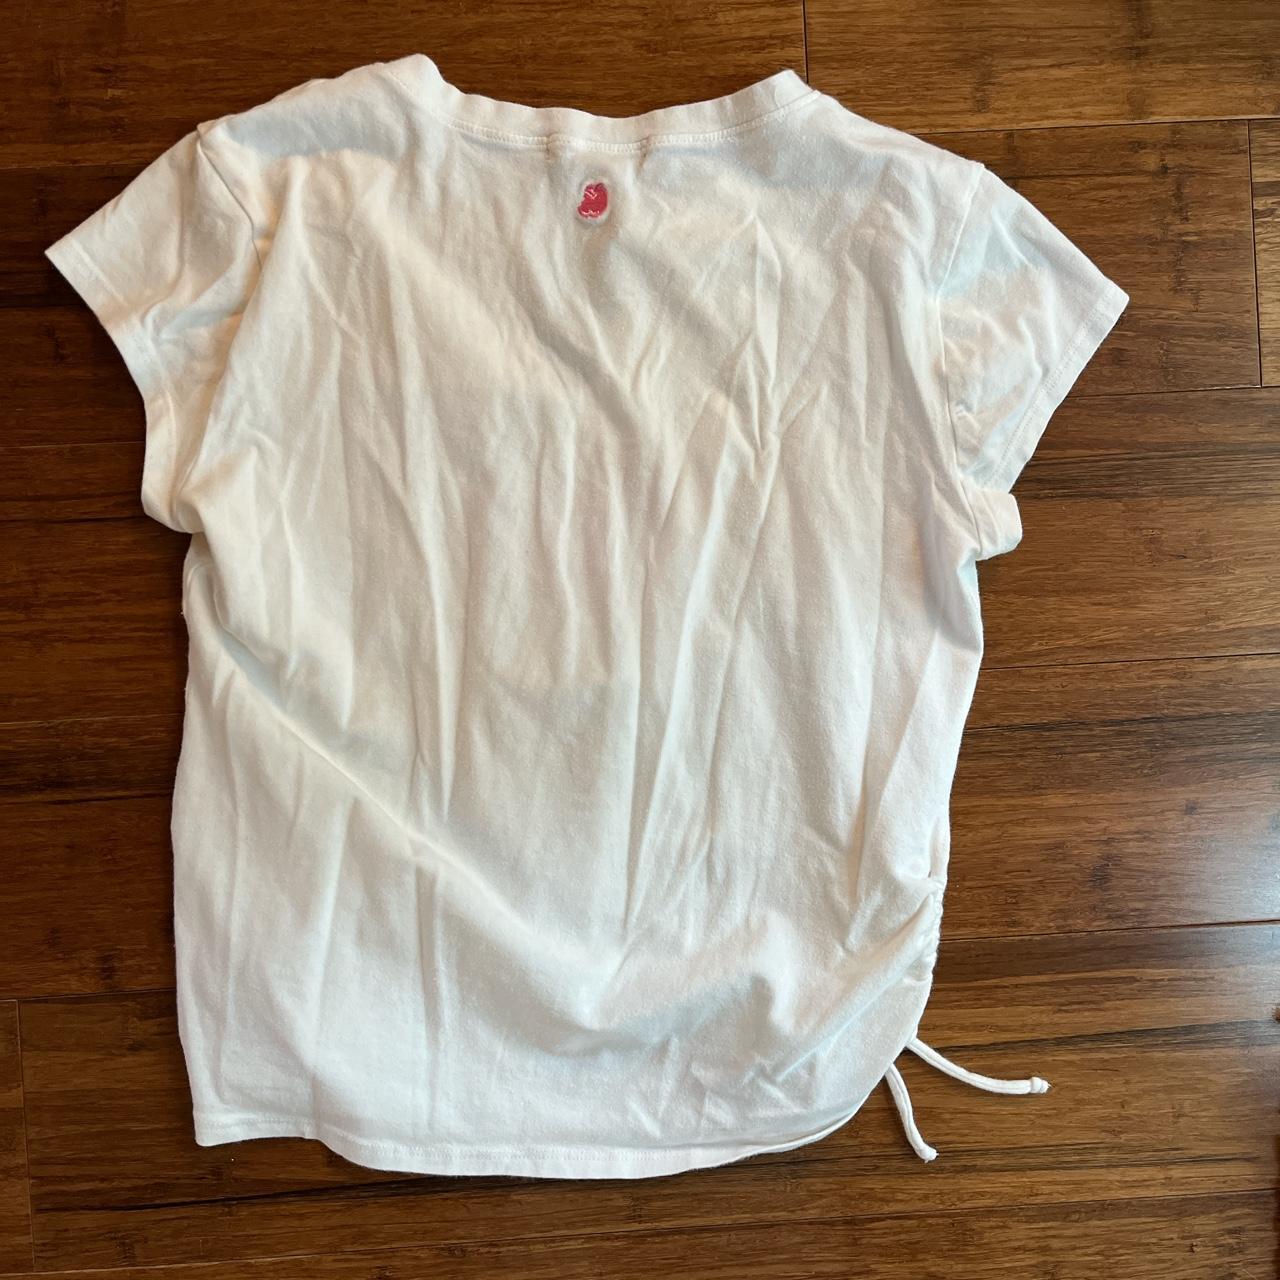 Apple Bottoms Women's White and Red Shirt (5)